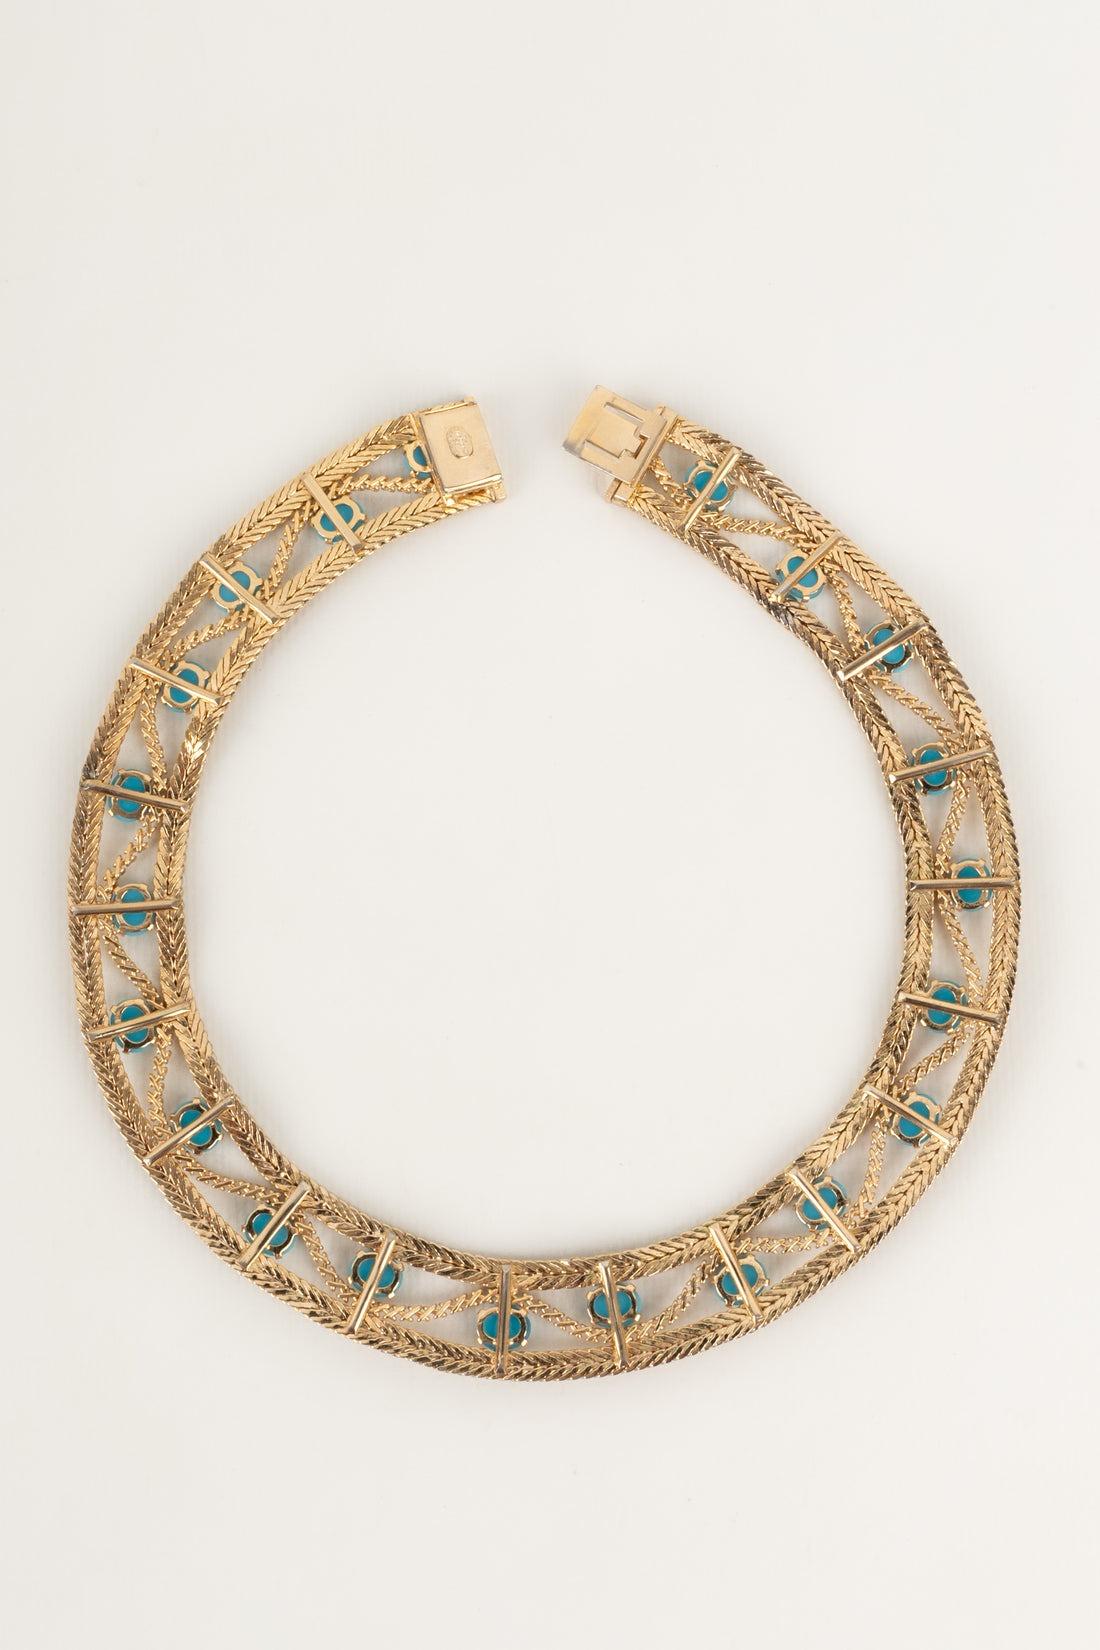 Dior - Golden metal short necklace with blue cabochons. 1965 Collection. To be noted, a clip is unsoldered on the back.

Additional information:
Condition: Very good condition
Dimensions: Length: 44 cm
Period: 20th Century

Seller Reference: BC62